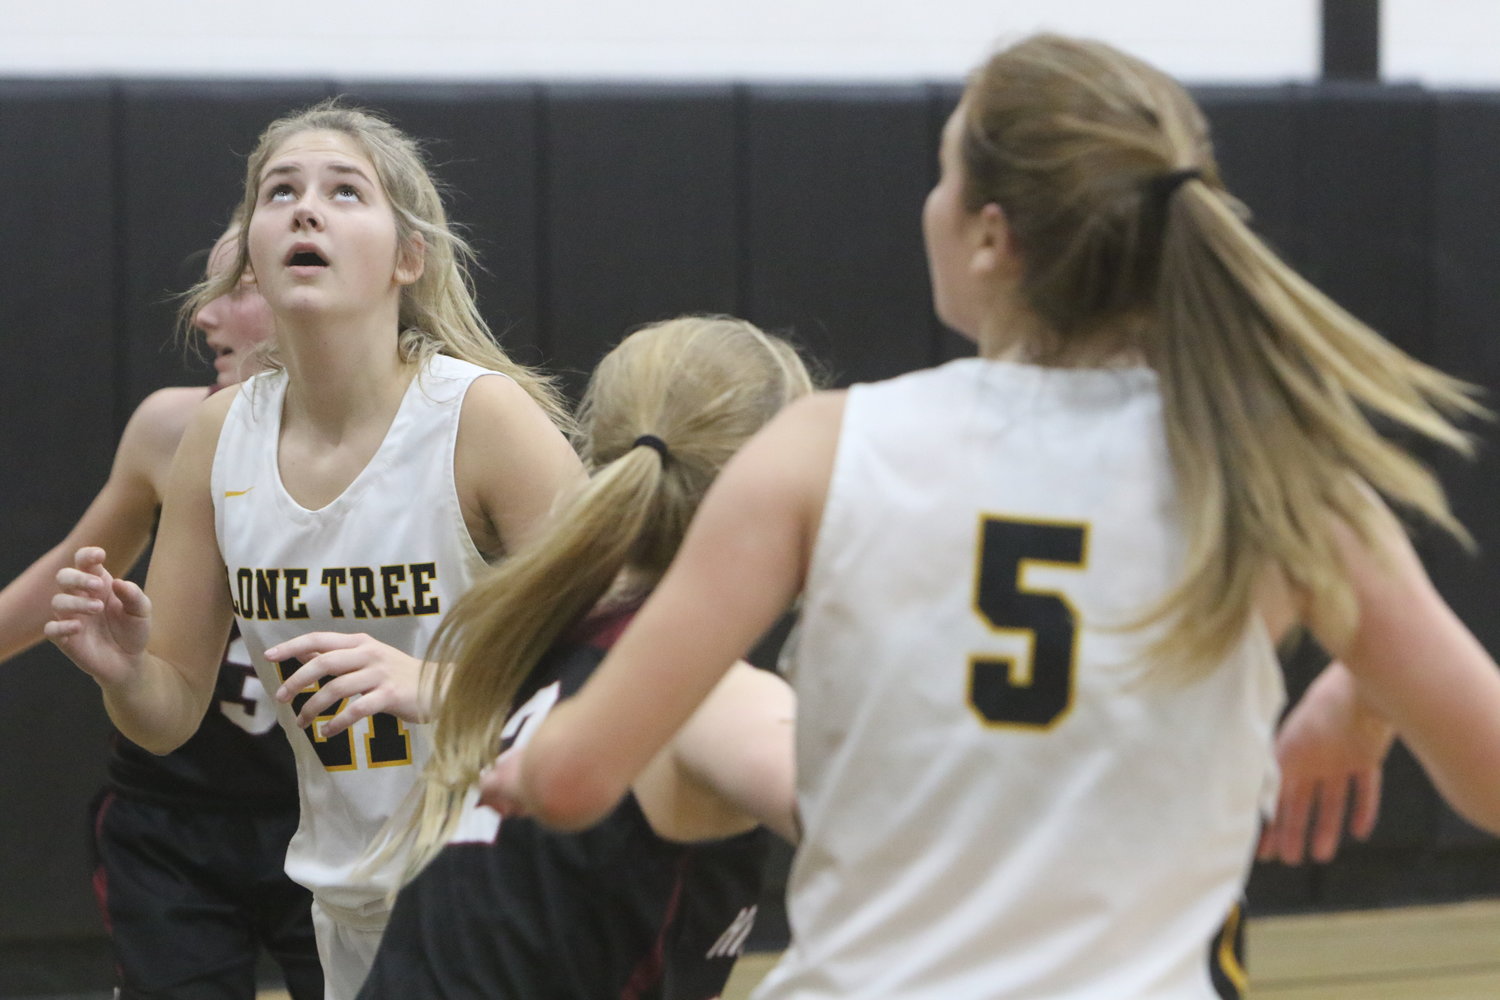 Lone Tree senior forward Kasey Chown (21) positions herself for a rebound in the Lions' 52-40 win over Hillcrest. Chown scored a career-high 23 points and had 11 rebounds for her second double-double in her last three games.